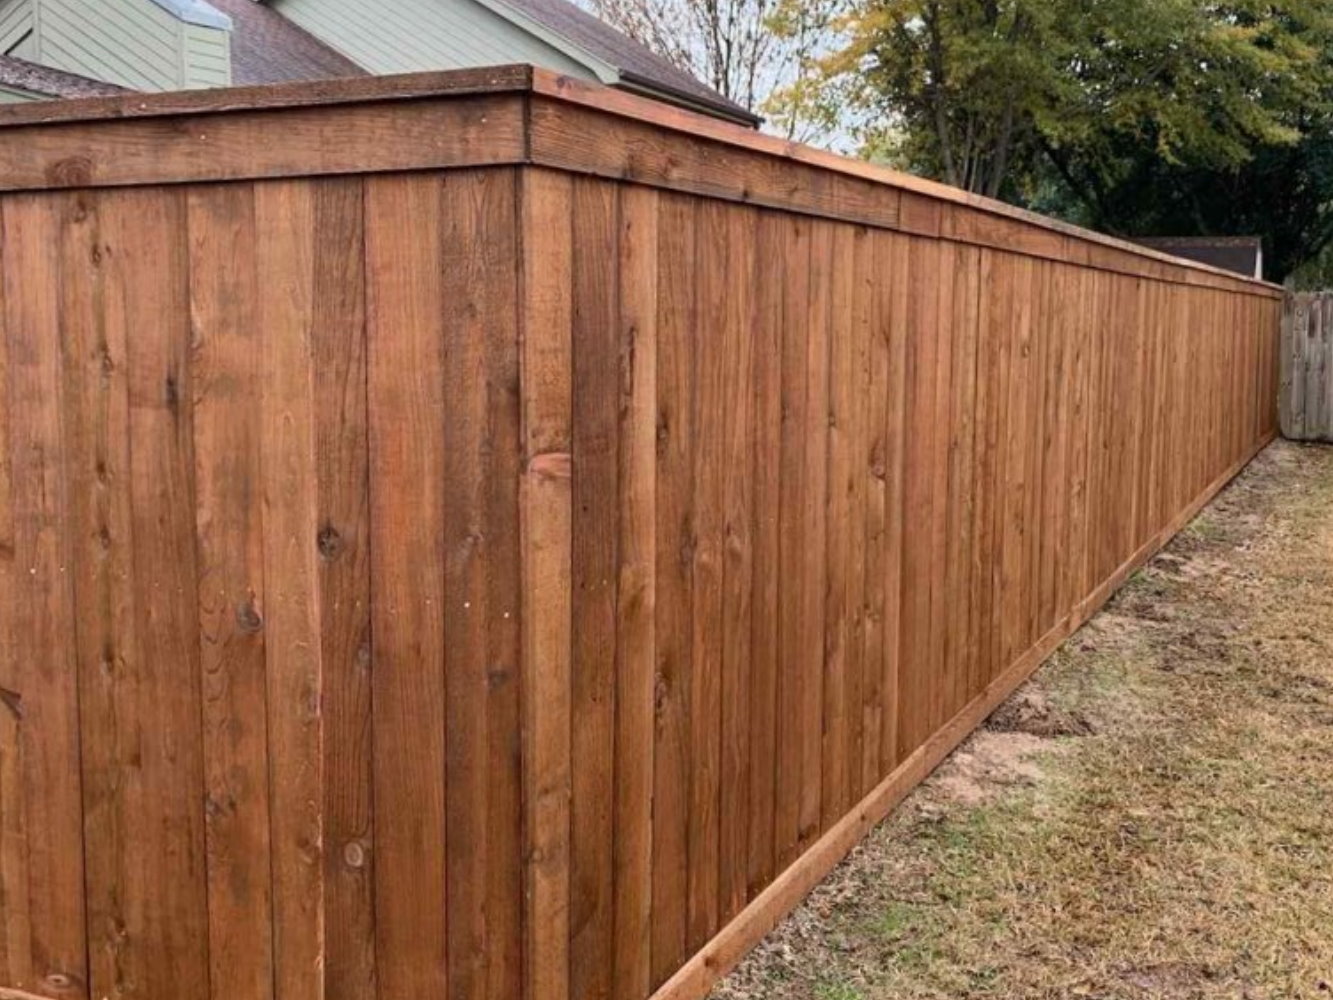 Lewisville AK cap and trim style wood fence